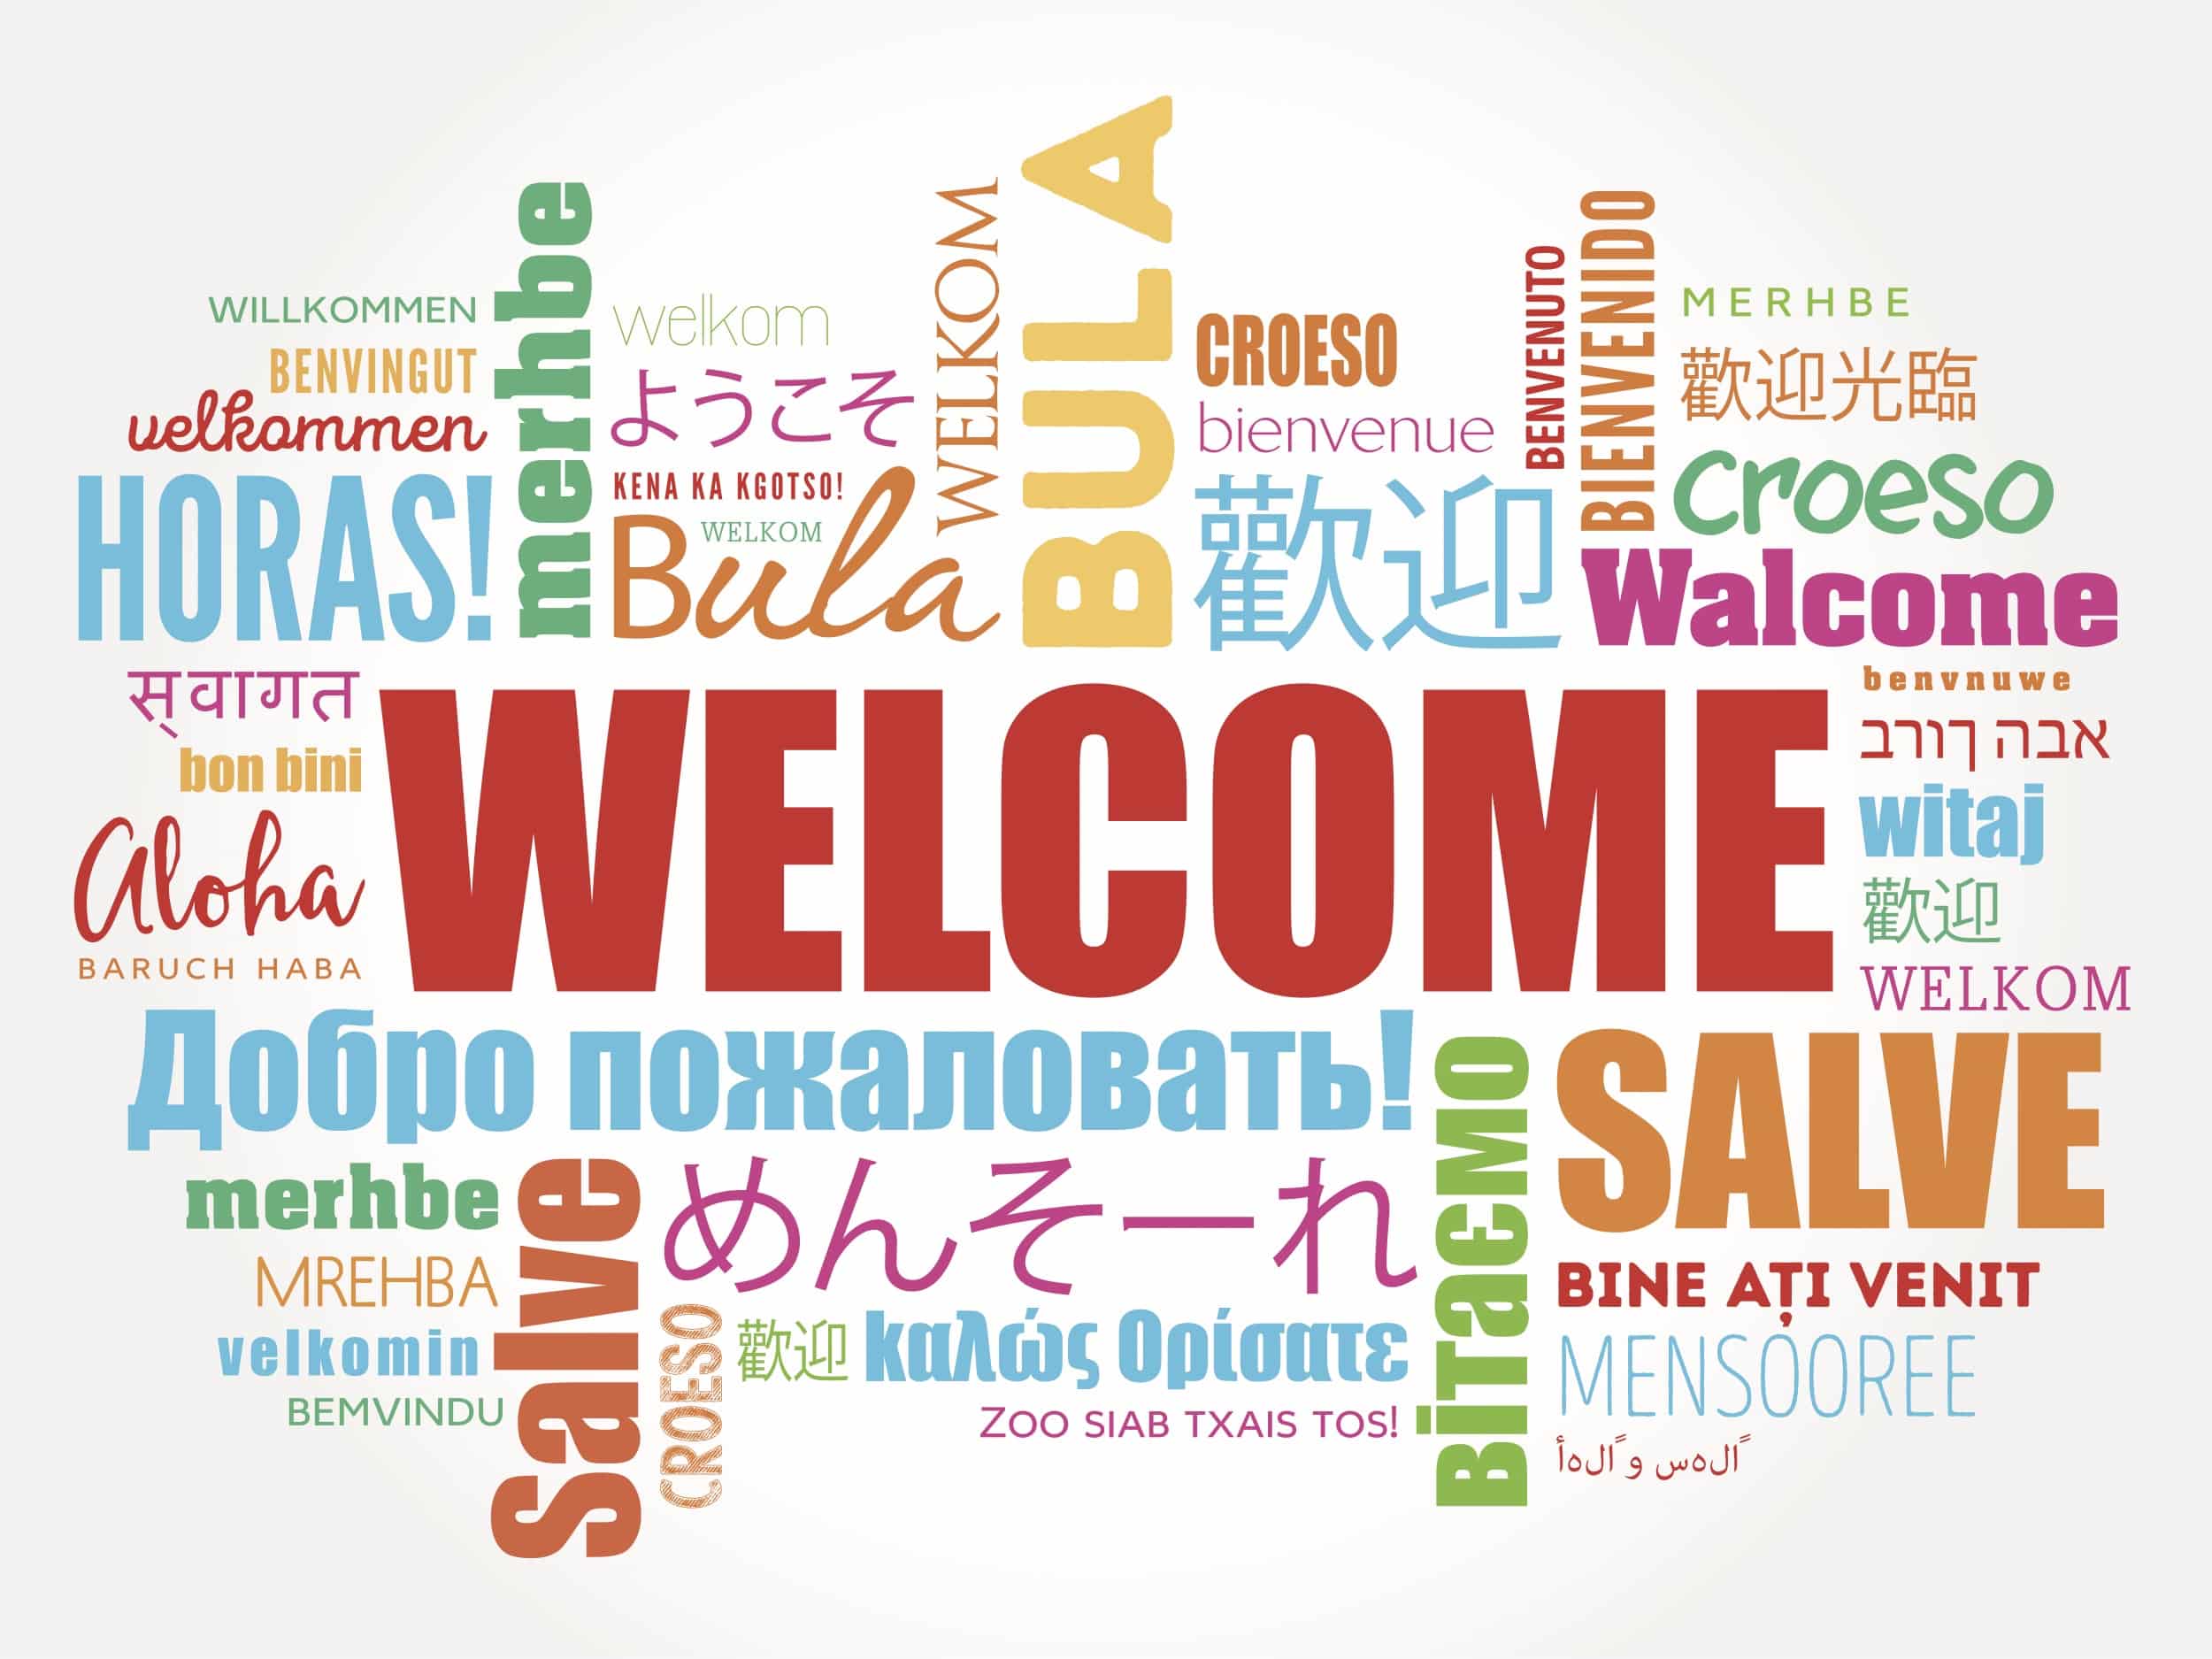 Illustration with the word "Welcome" in red letters in the middle surrounded by welcome in different languages surrounding it.